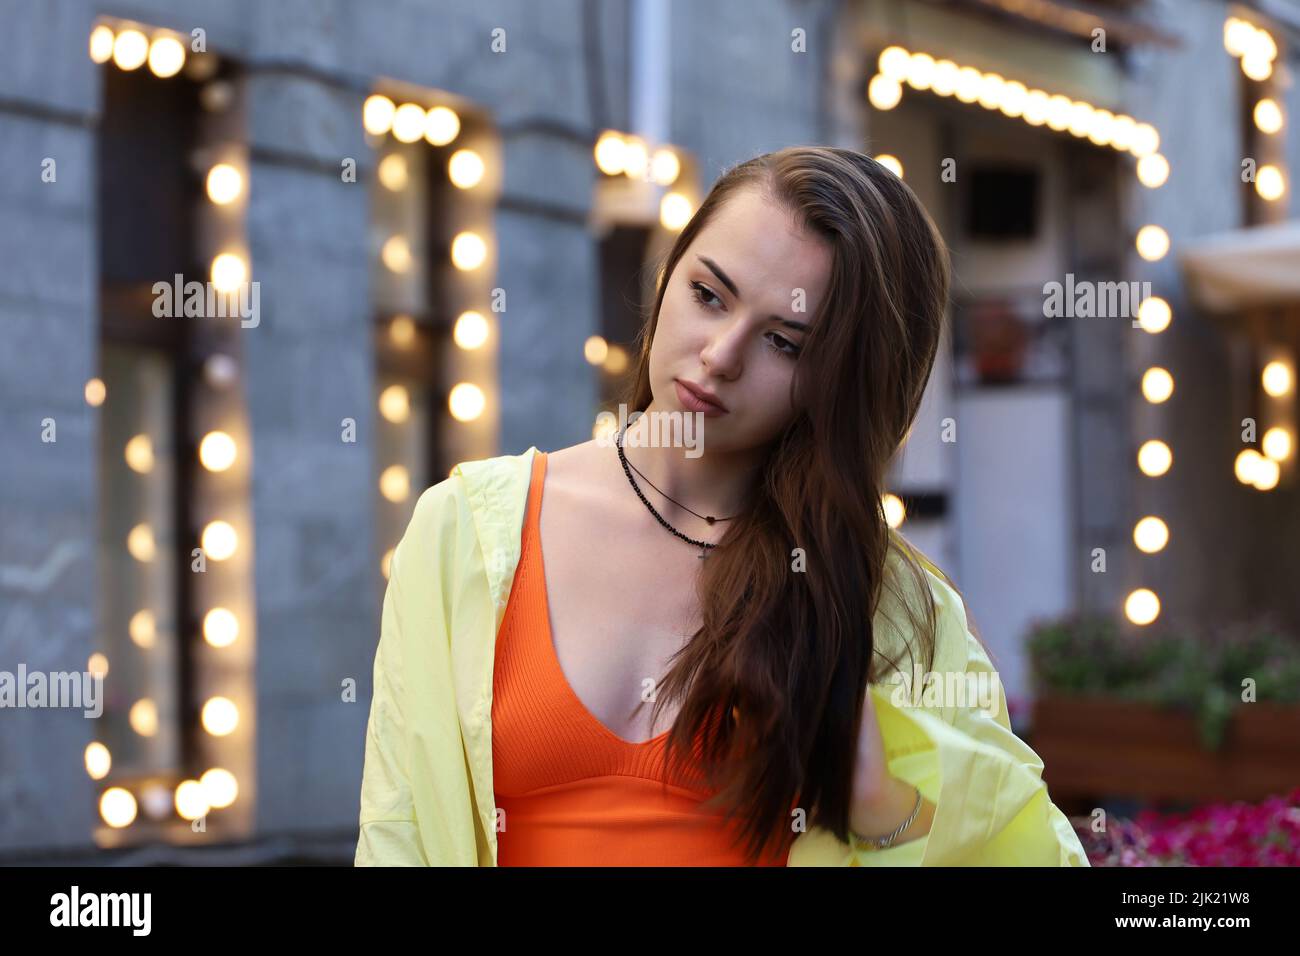 Portrait of pretty young girl with long hair and perfect makeup wearing orange top and yellow shirt on a street on blurred lights background Stock Photo